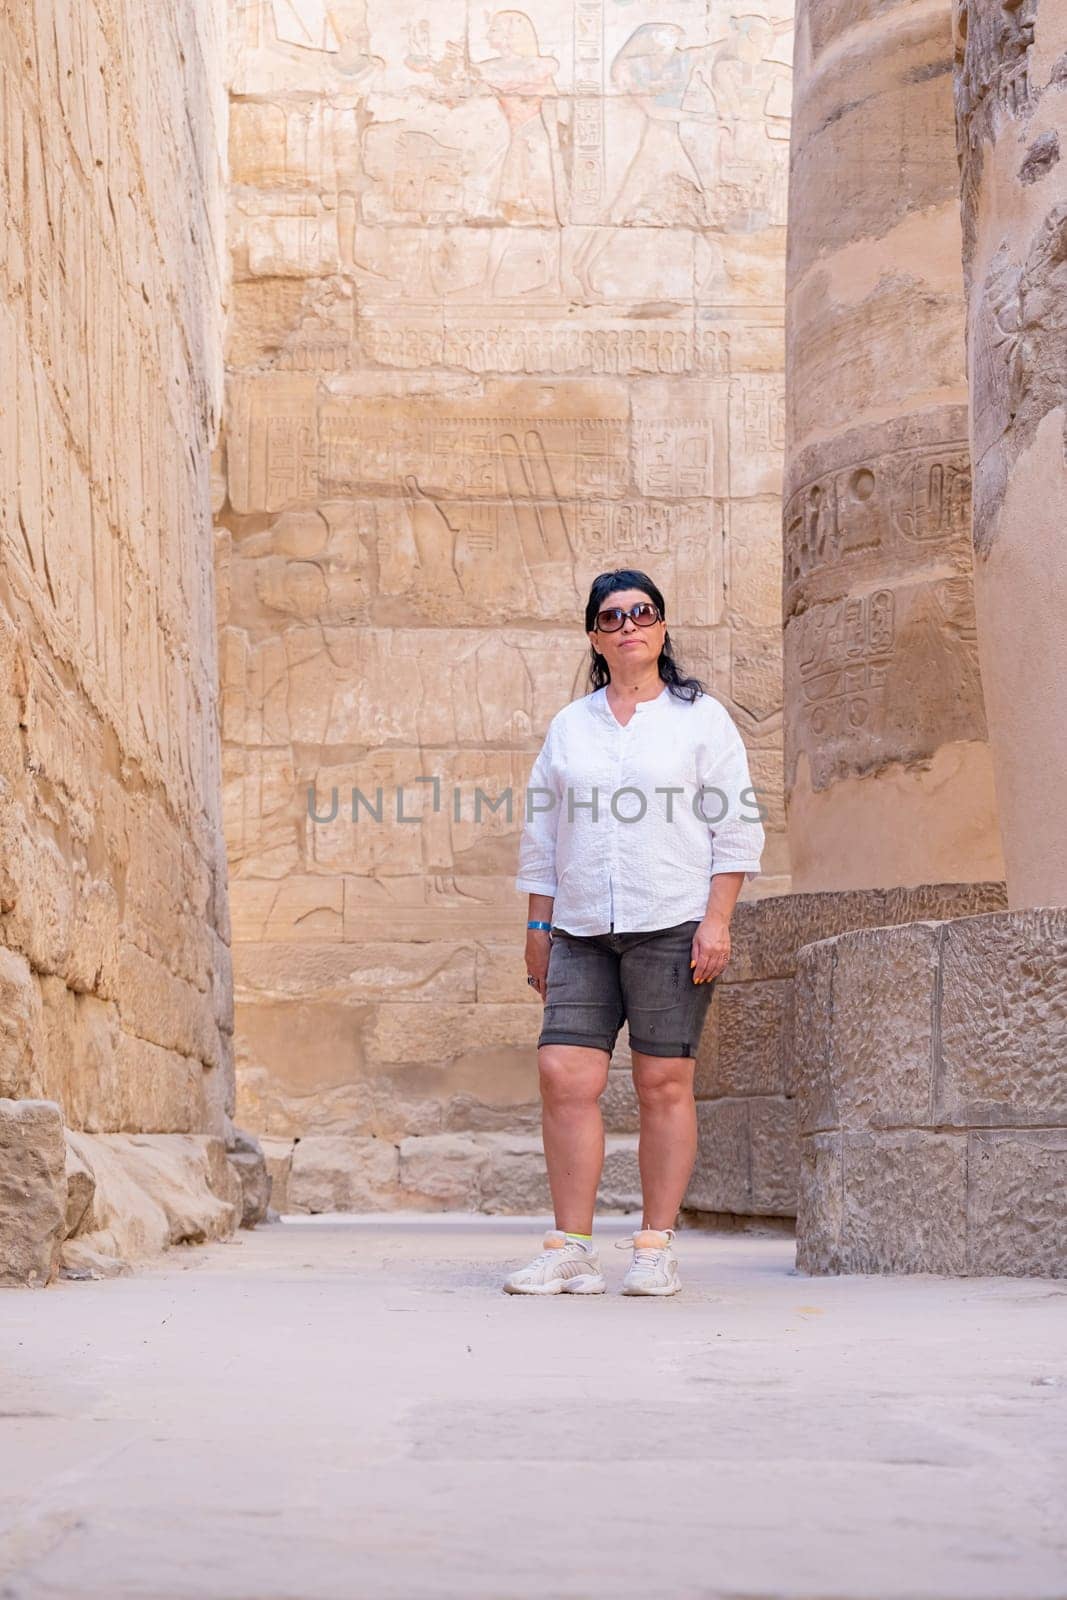 Woman traveler explores the ruins of the ancient Karnak temple in the city of Luxor in Egypt. by Desperada